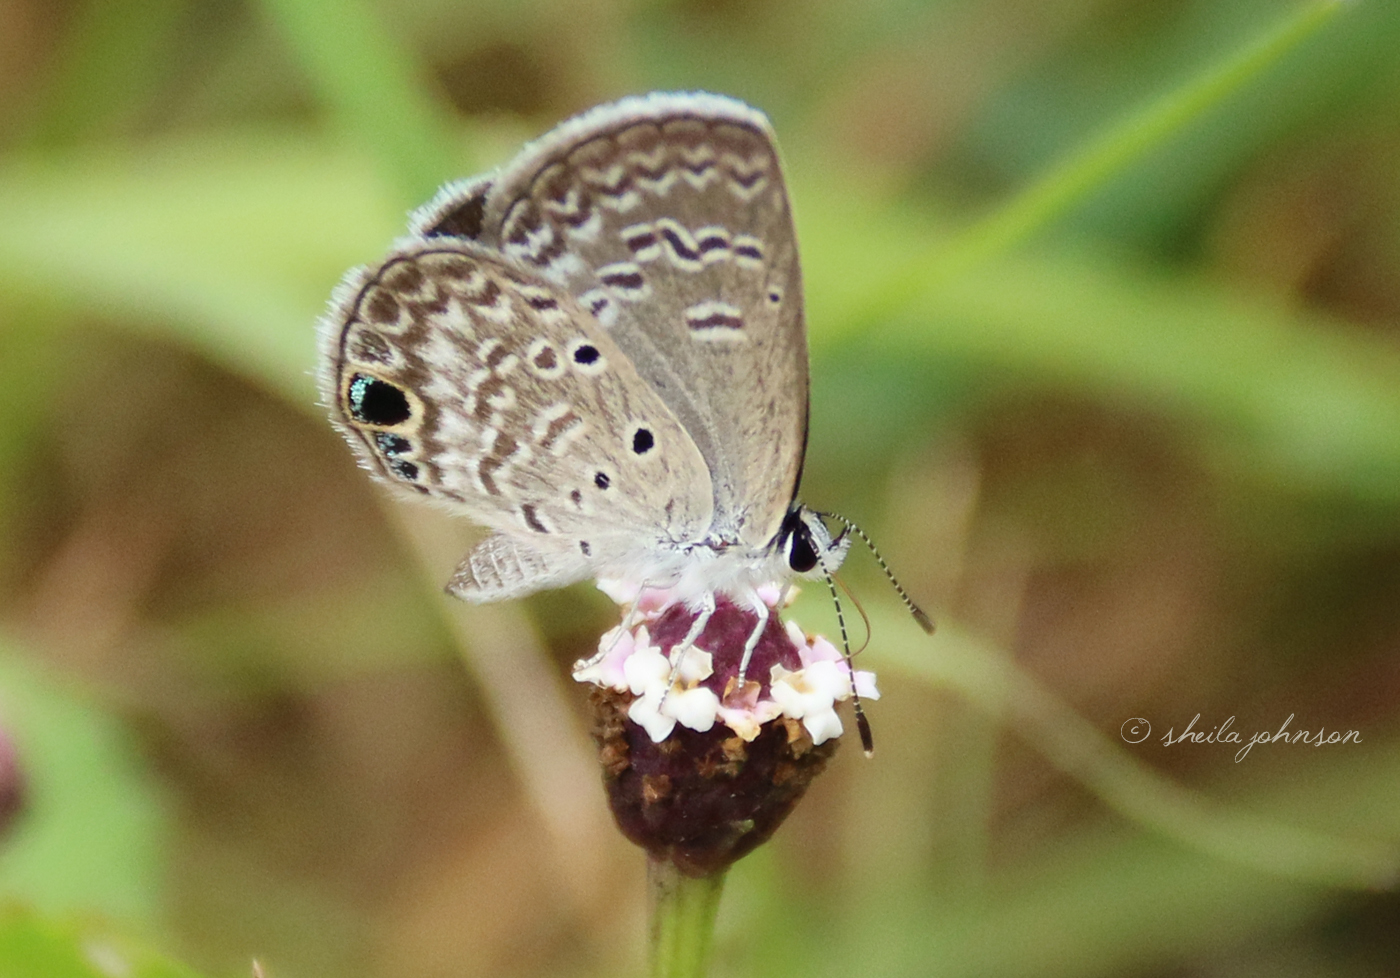 Look As We May, We See Nothing 'Common' About The Common Cerulean Butterfly. Take Note Of The Heart Spots On Its Wing -- Another Example Of 'Hearts In Nature.'' Here, This One Sits Upon A Wildflower, Looking Like A Wildflower Itself.